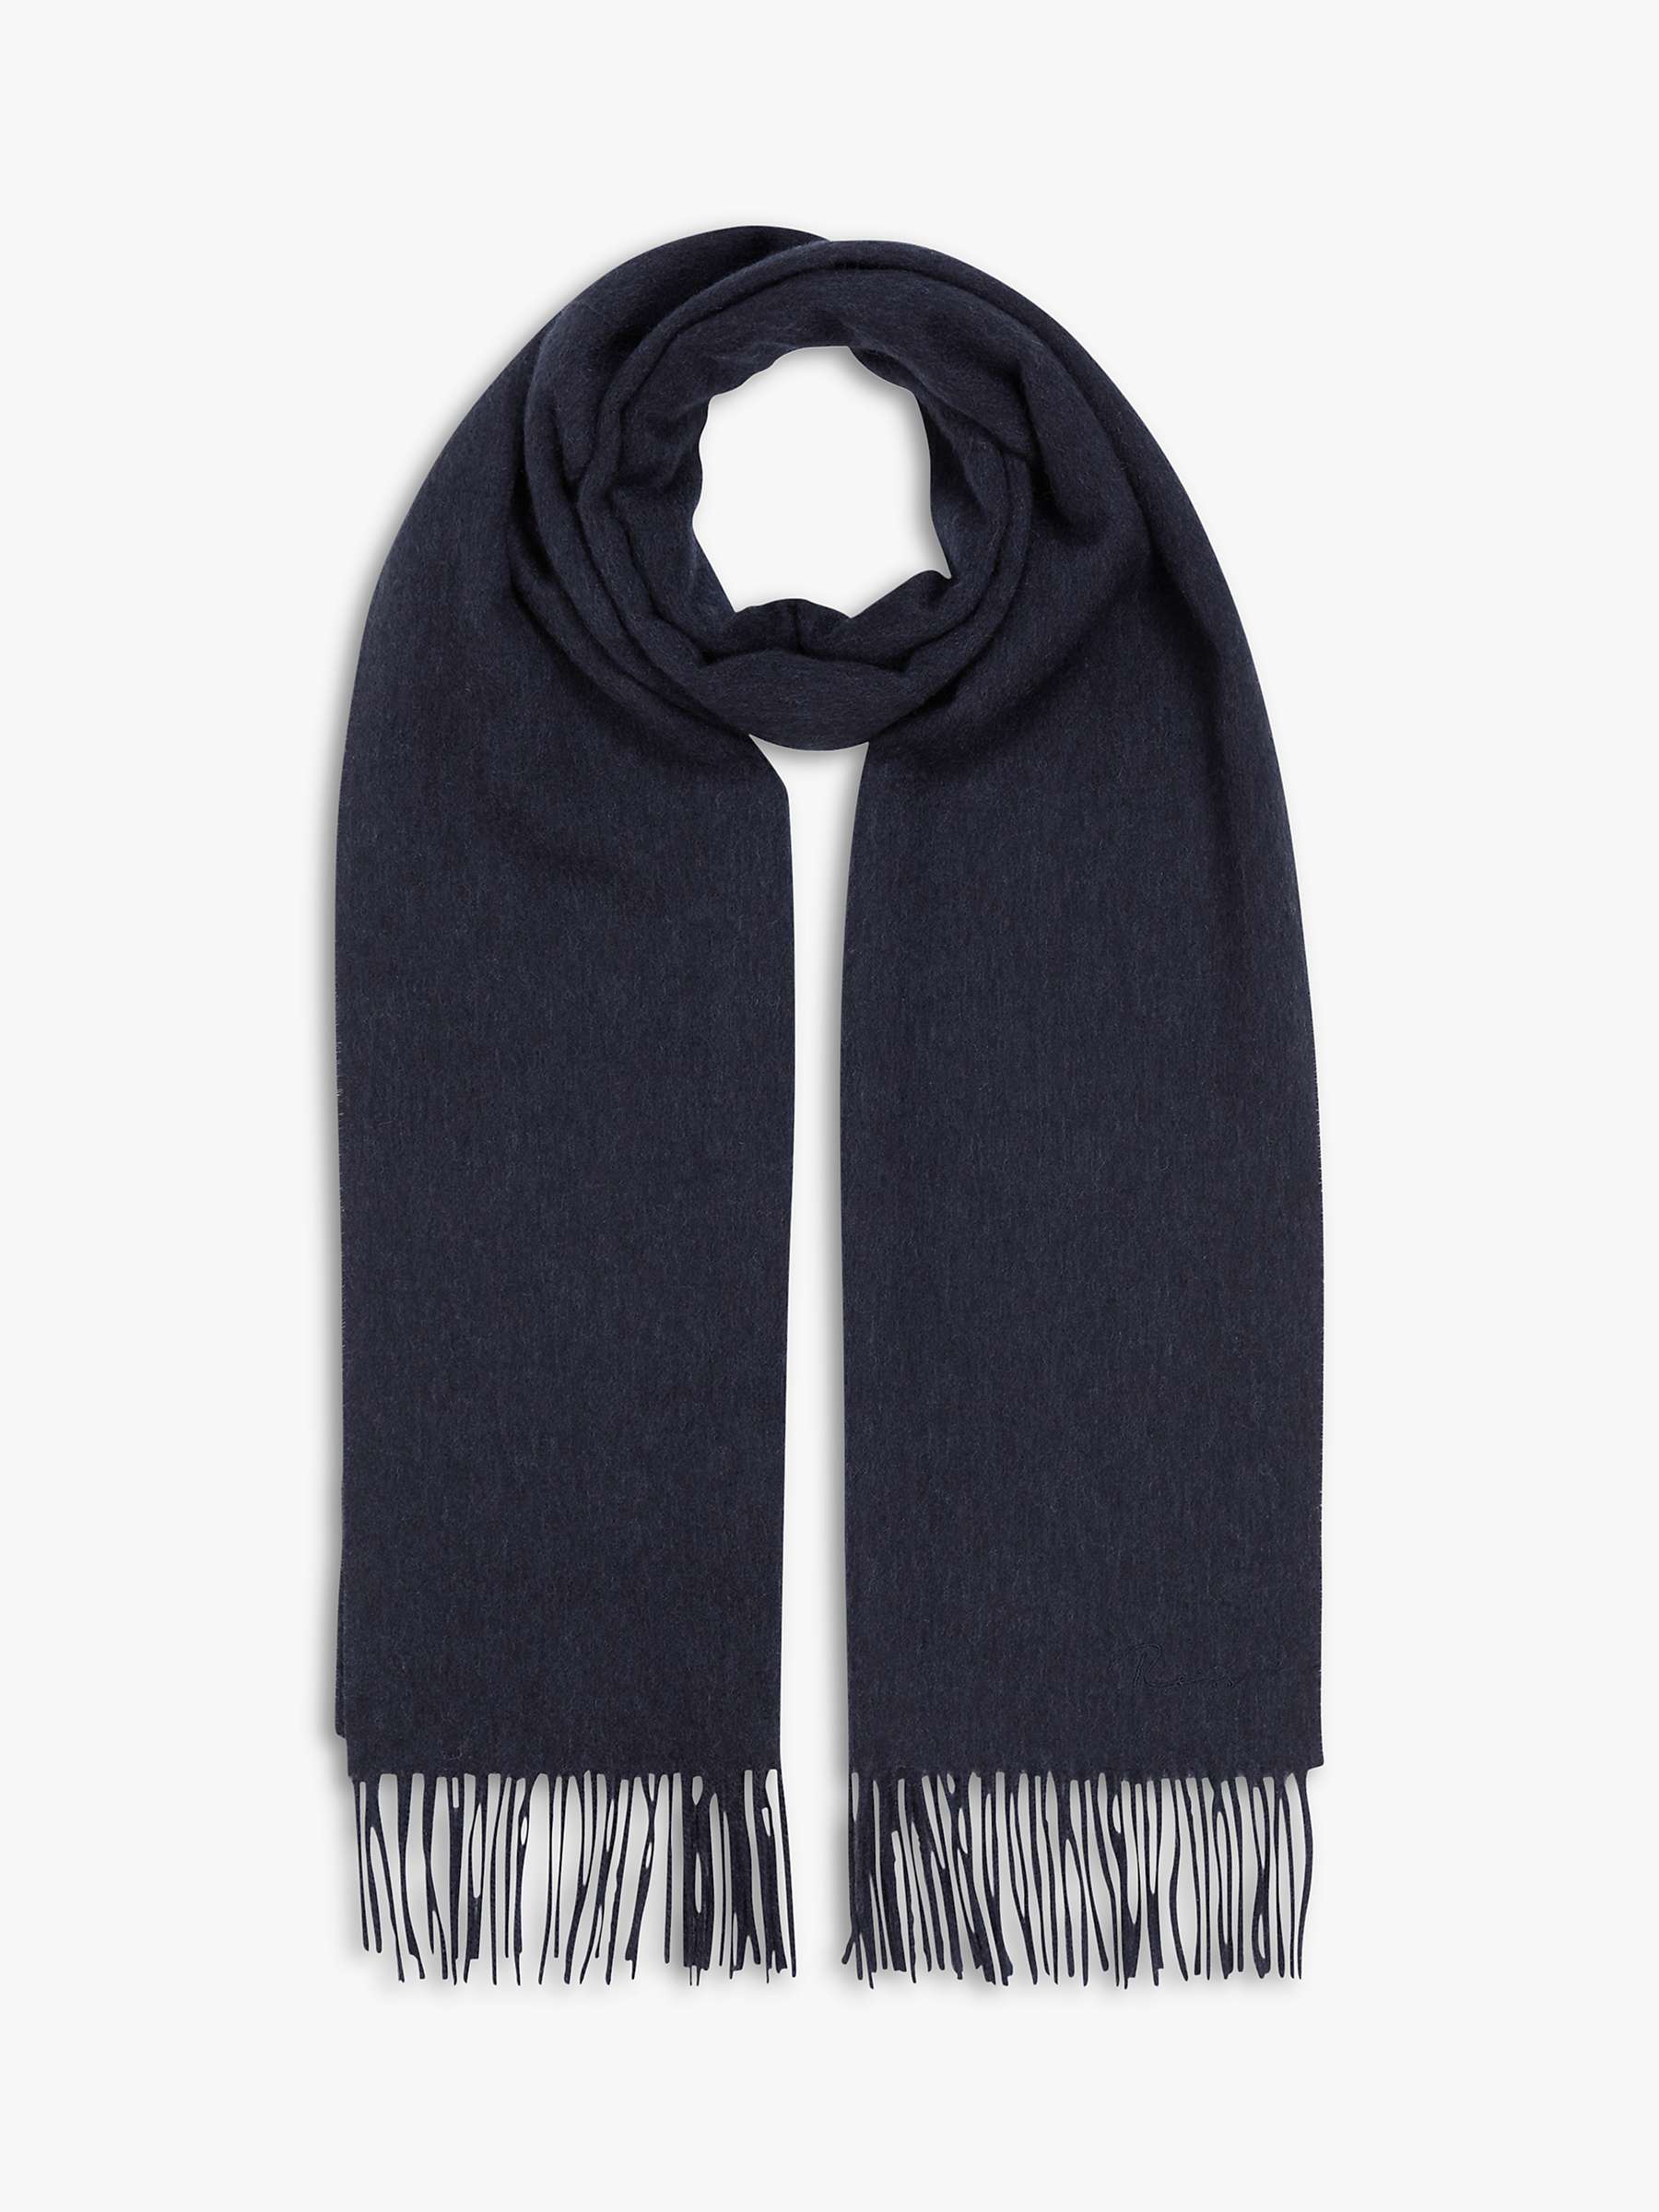 Reiss Picton Cashmere Blend Scarf, Navy at John Lewis & Partners